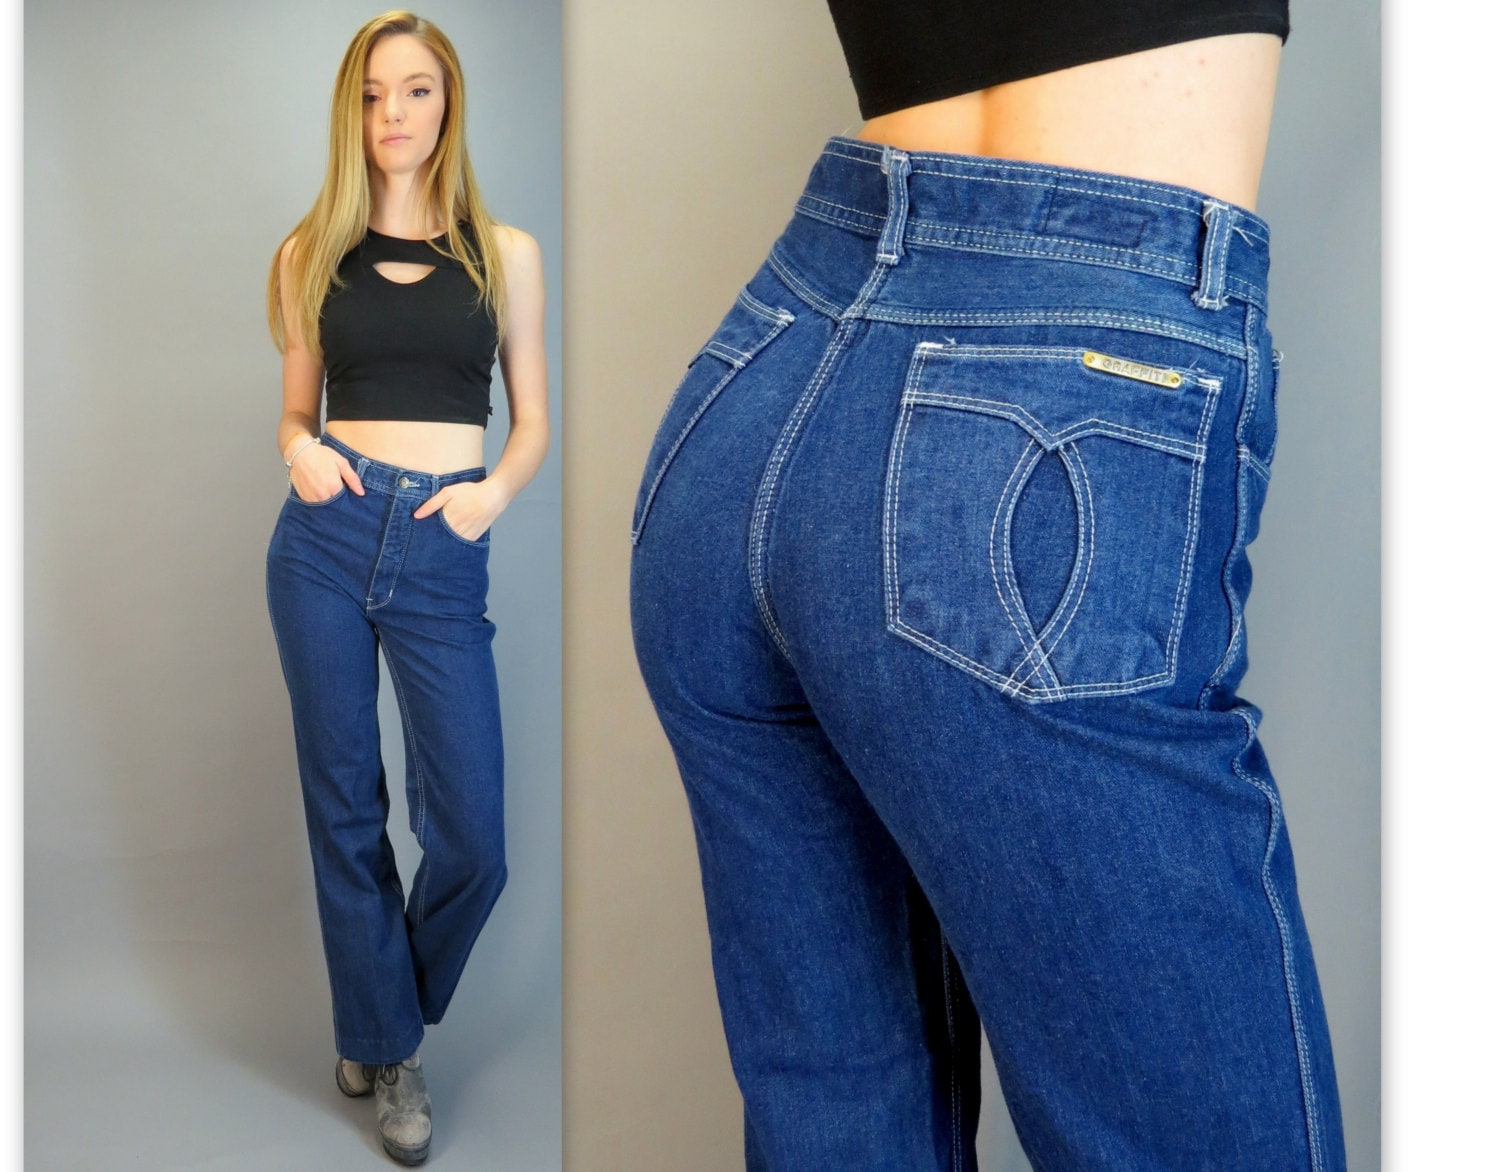 were high waisted jeans popular in the 70s